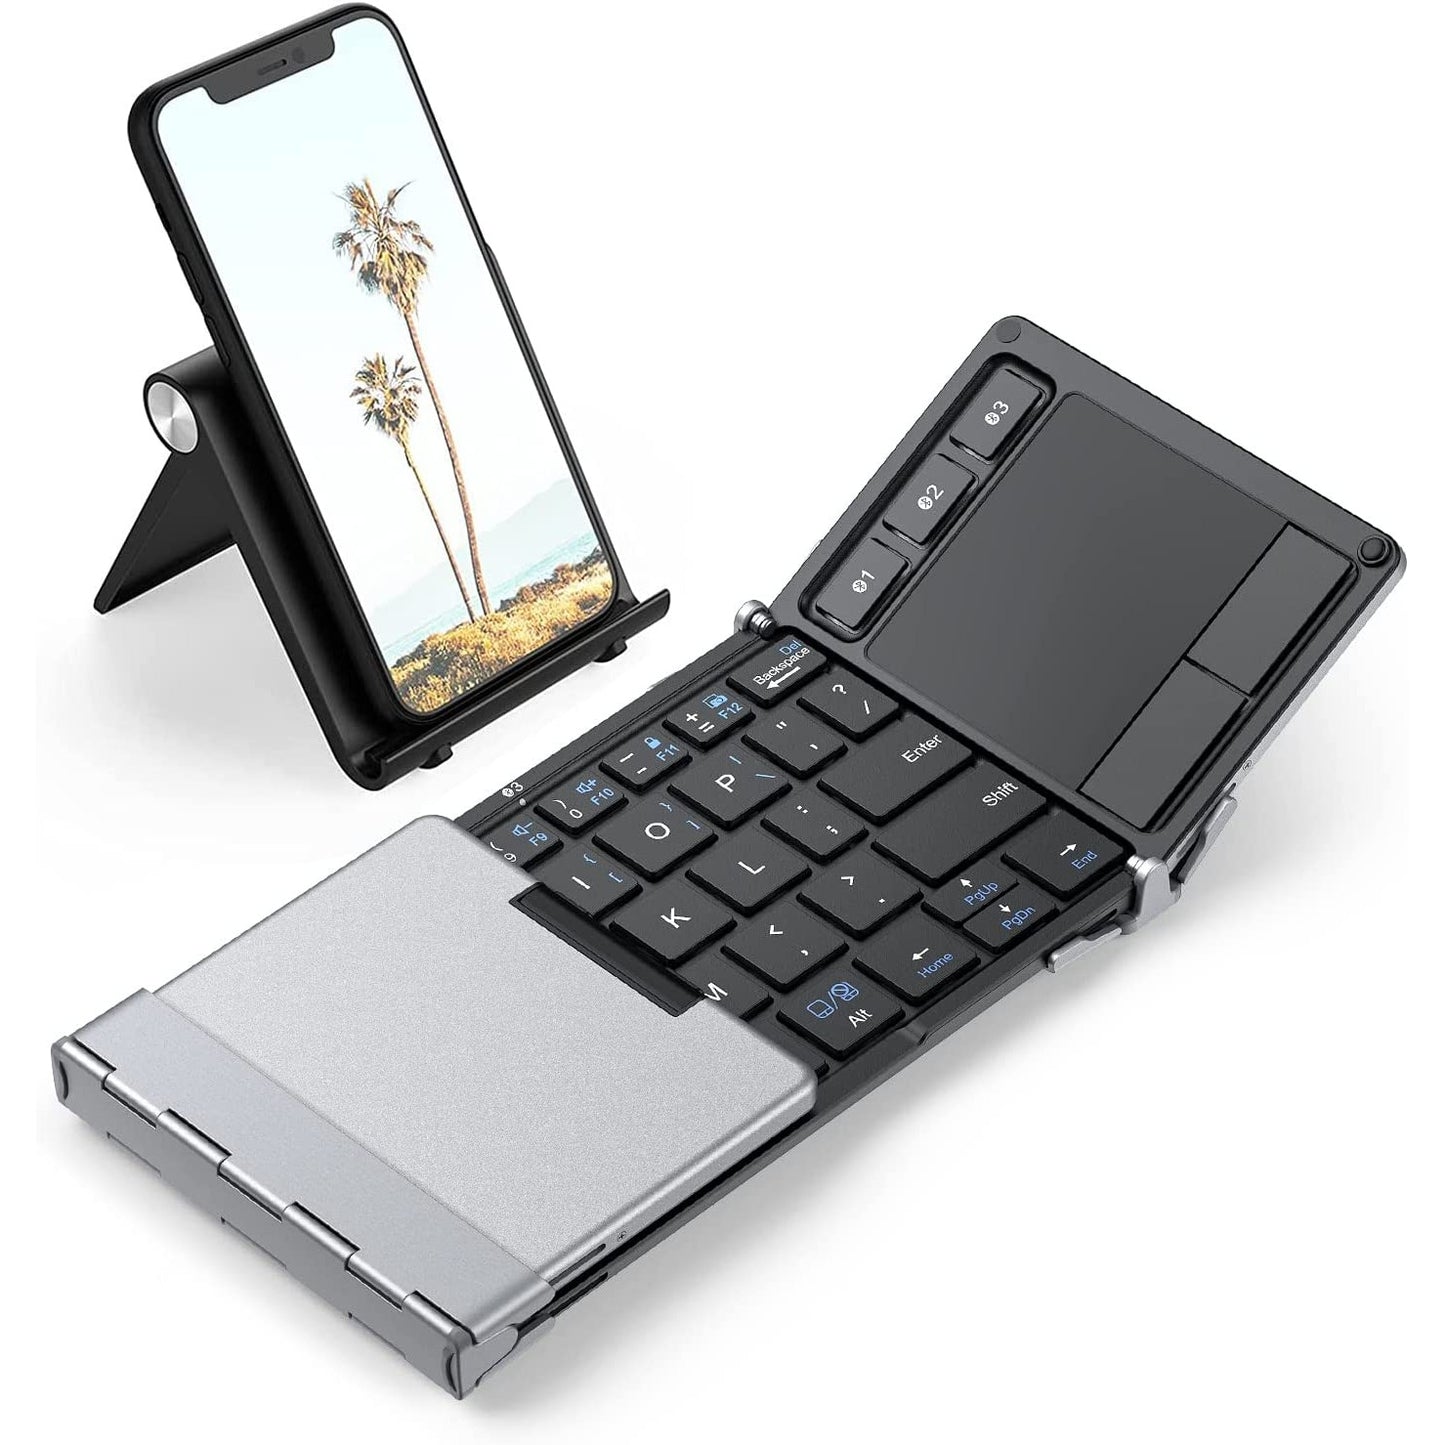 A Bluetooth foldable keyboard with one side folded over and the other side closed. There is a cell phone behind the keyboard.